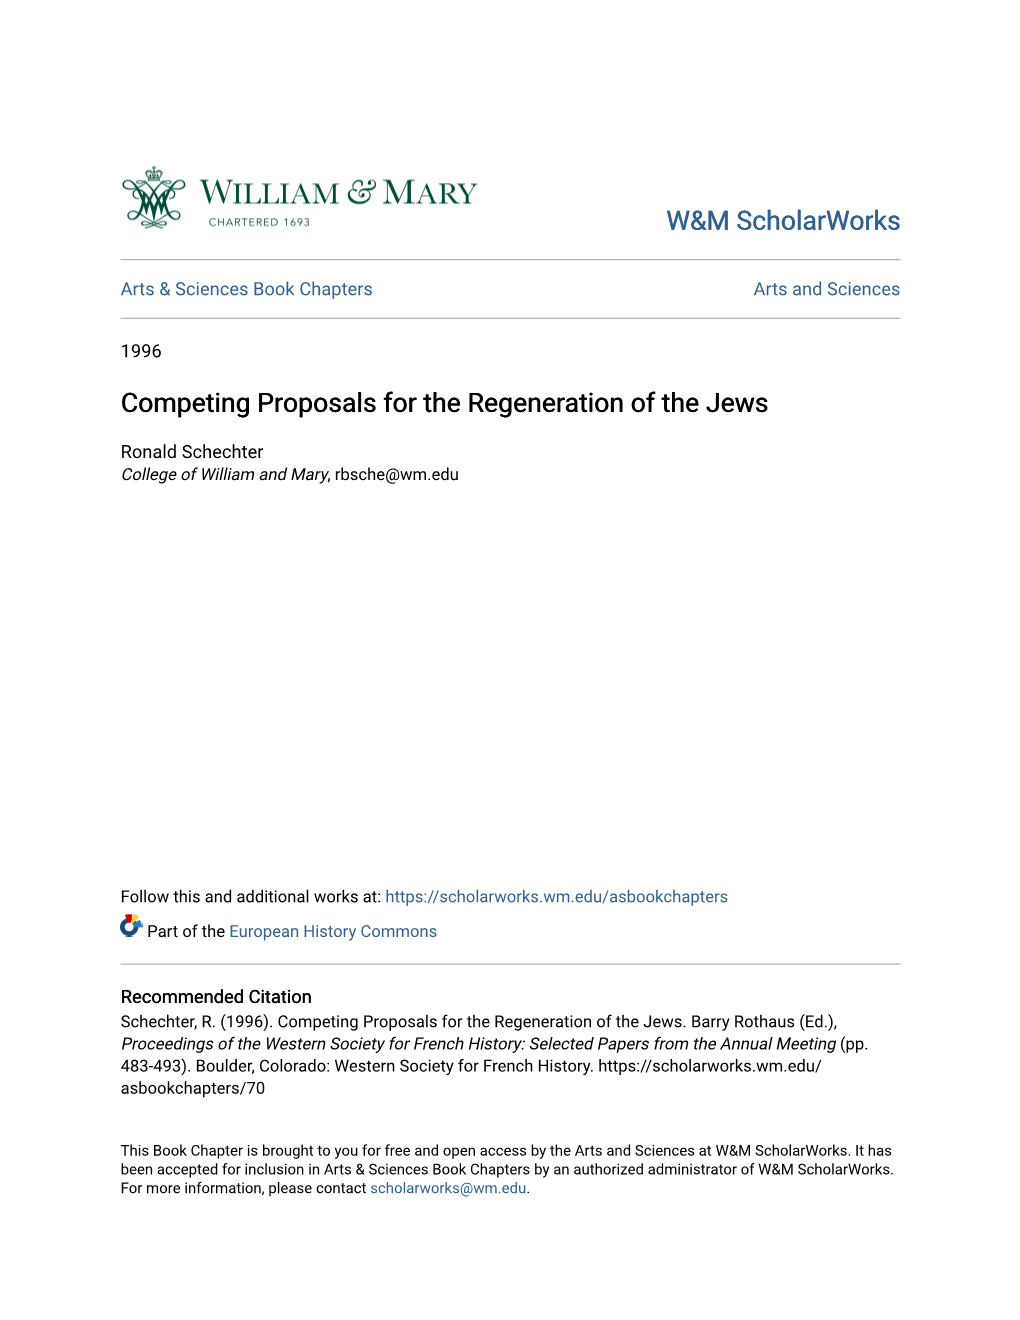 Competing Proposals for the Regeneration of the Jews